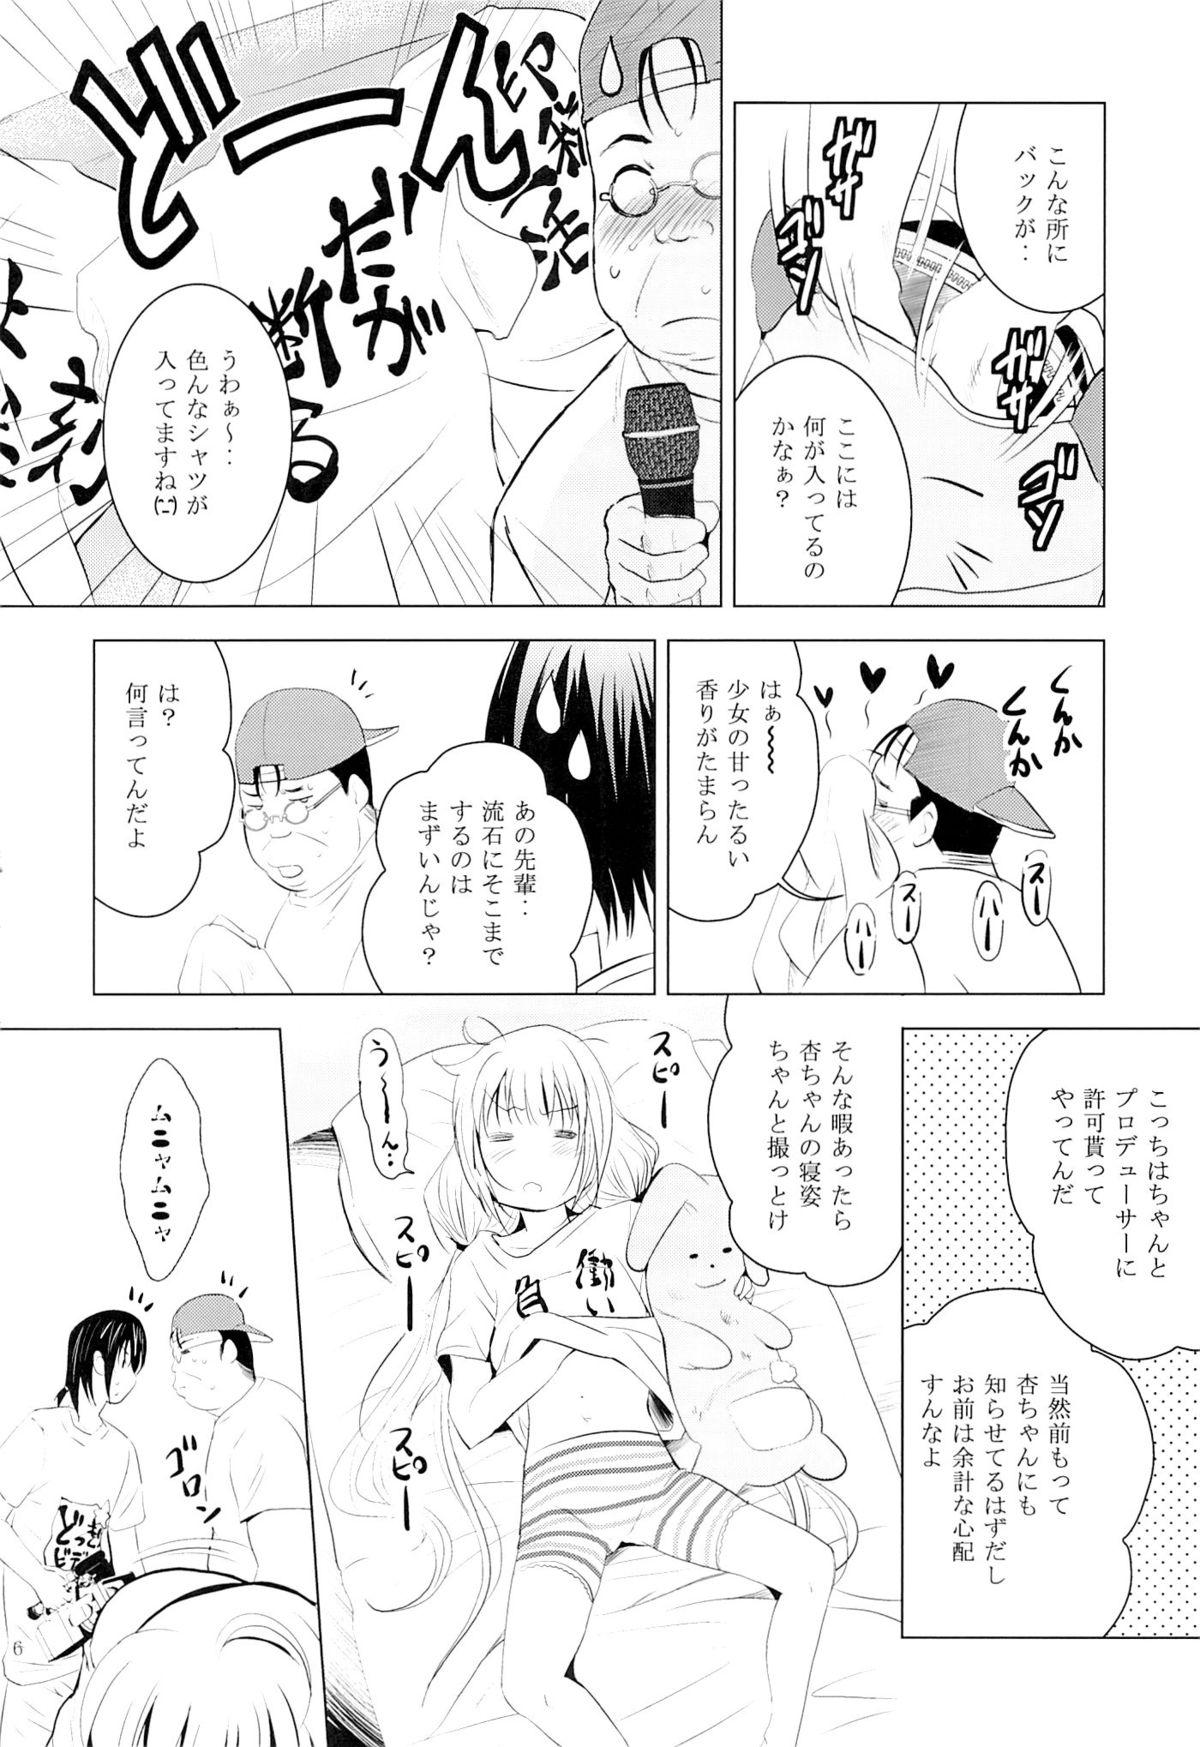 Hard Cock MOUSOU Mini Theater 37 - The idolmaster Casting - Page 5